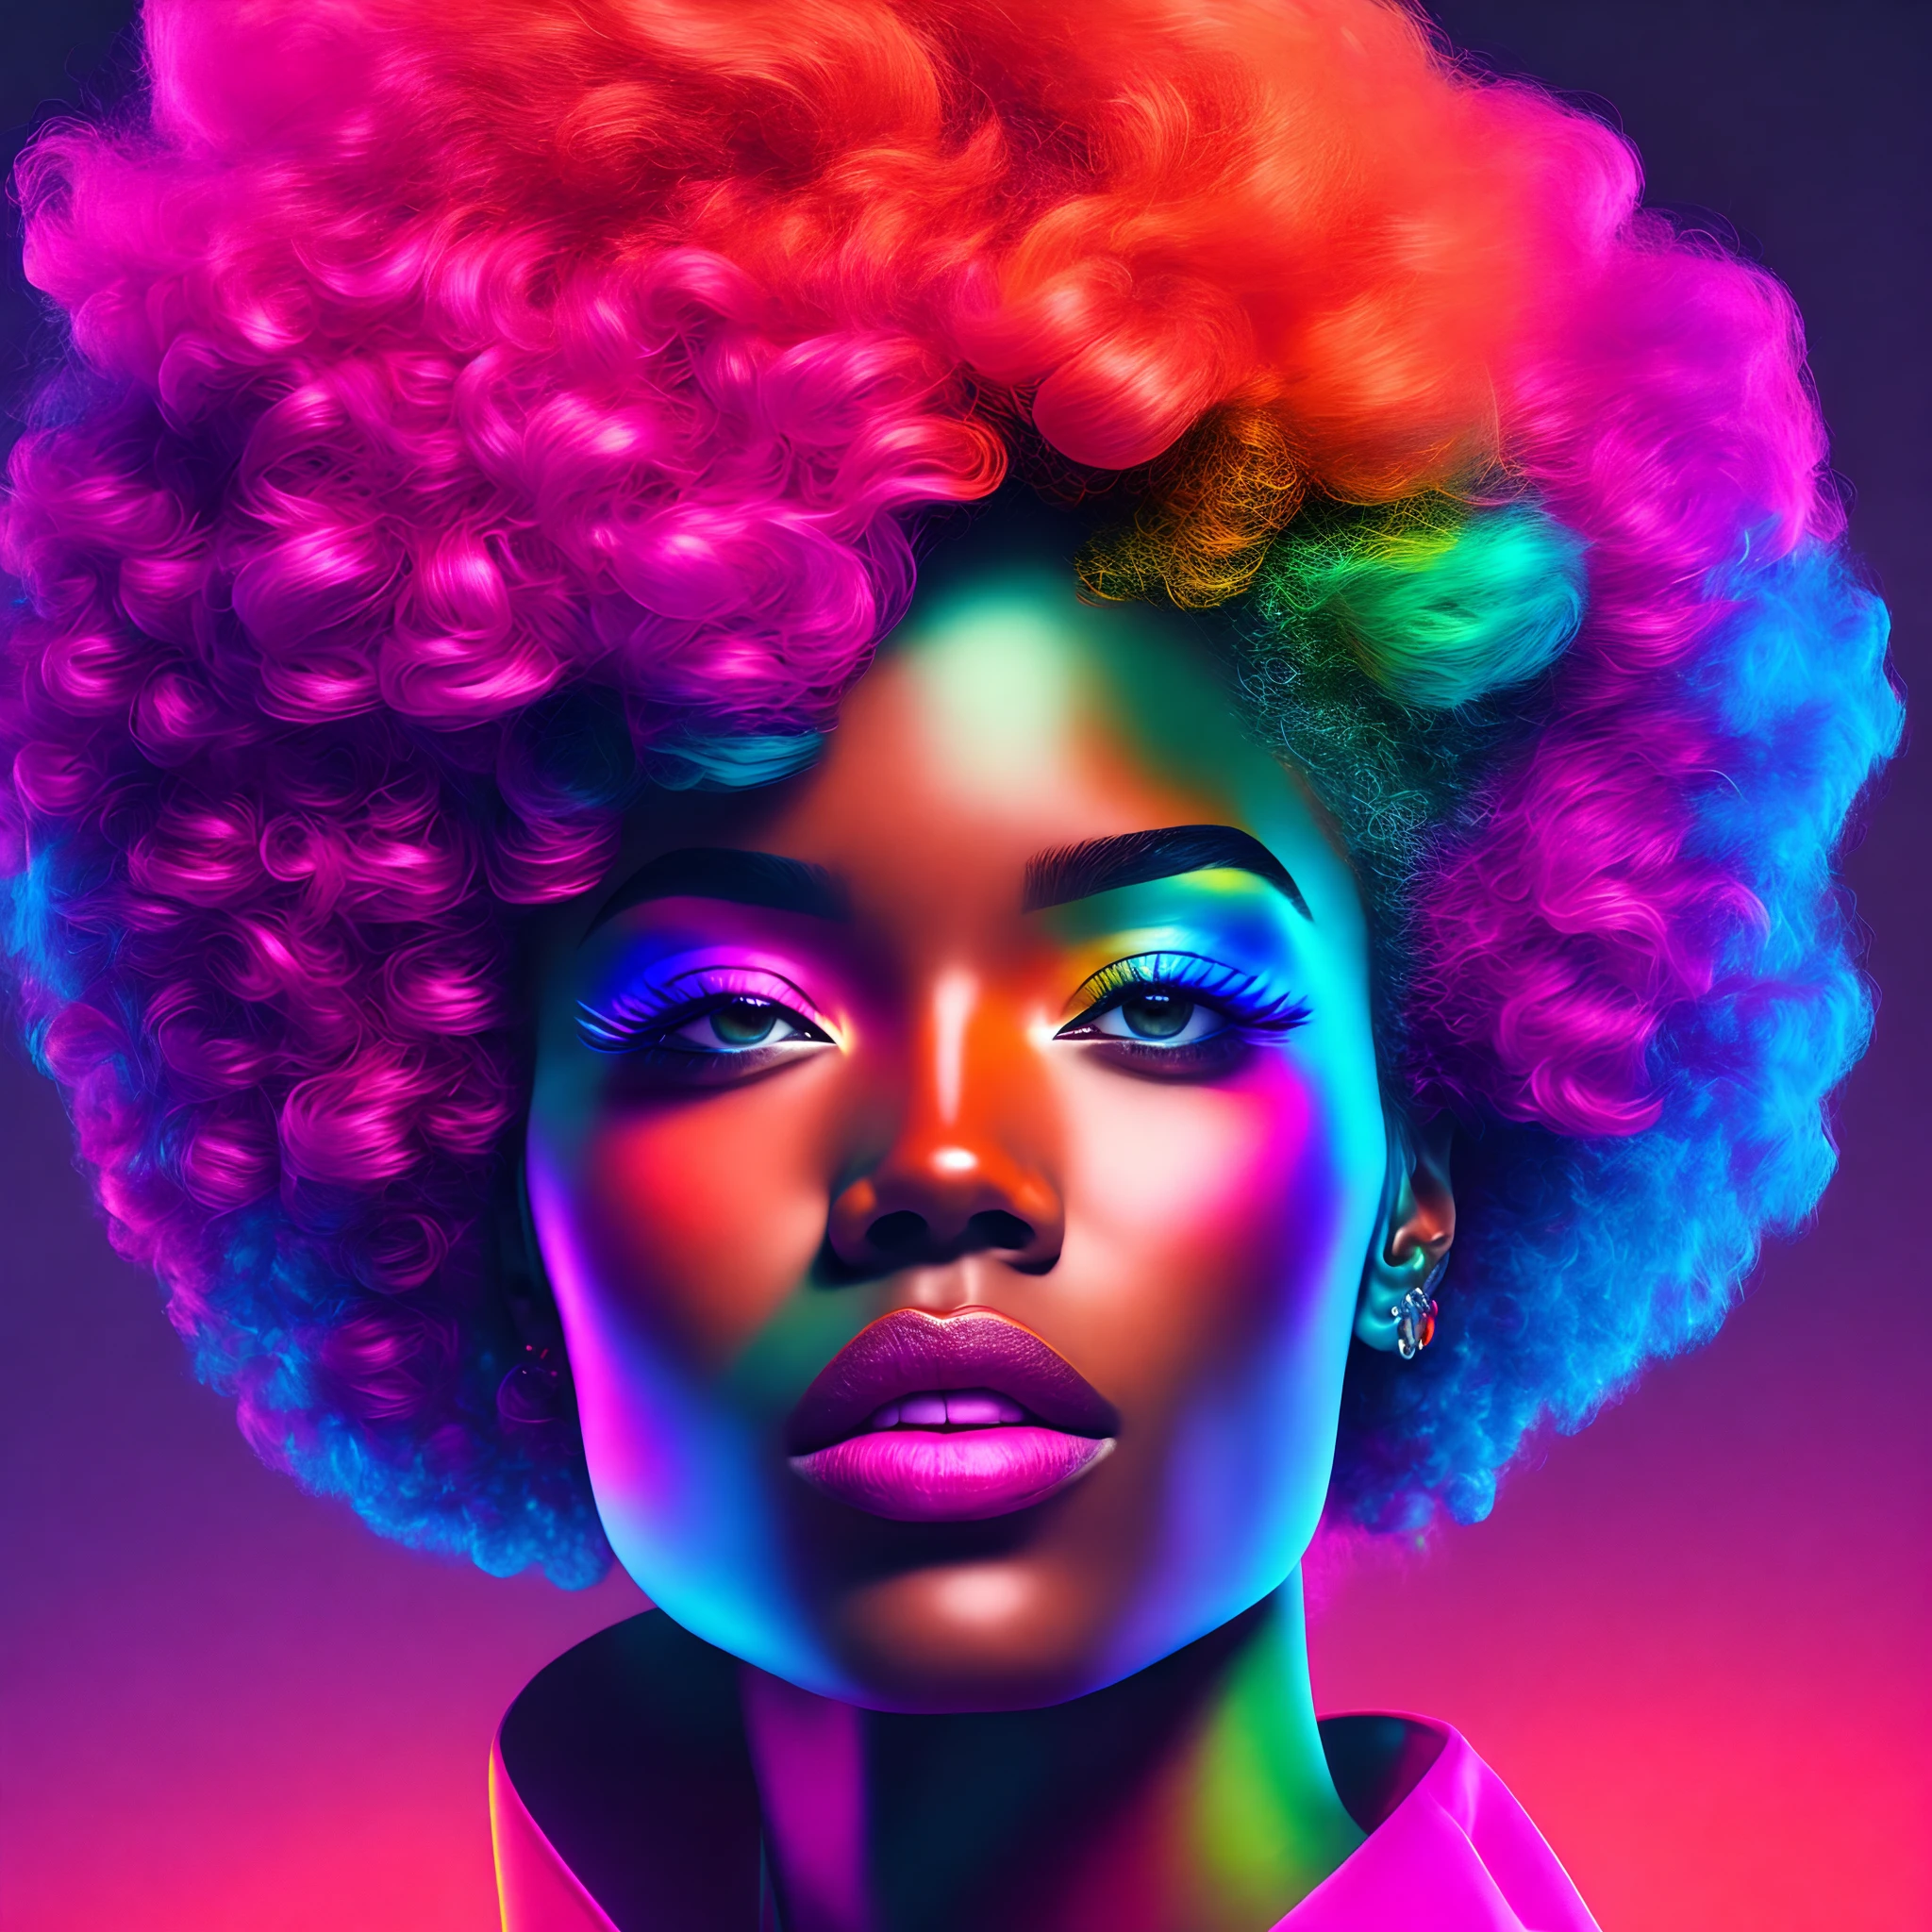 a woman with colorful afro hair and earrings, high colored texture, portrait color glamour, colorized portrait detalhado, neon color bleed, high-quality portrait, colorized portrait, ultraviolet and neon colors, color studio portrait, full-colour illustration, vibrant colors hyper realism, vibrant neon colors, pop and vibrant colors, cor neon, colorful fashion, cyberpunk style color, iridescent illustration